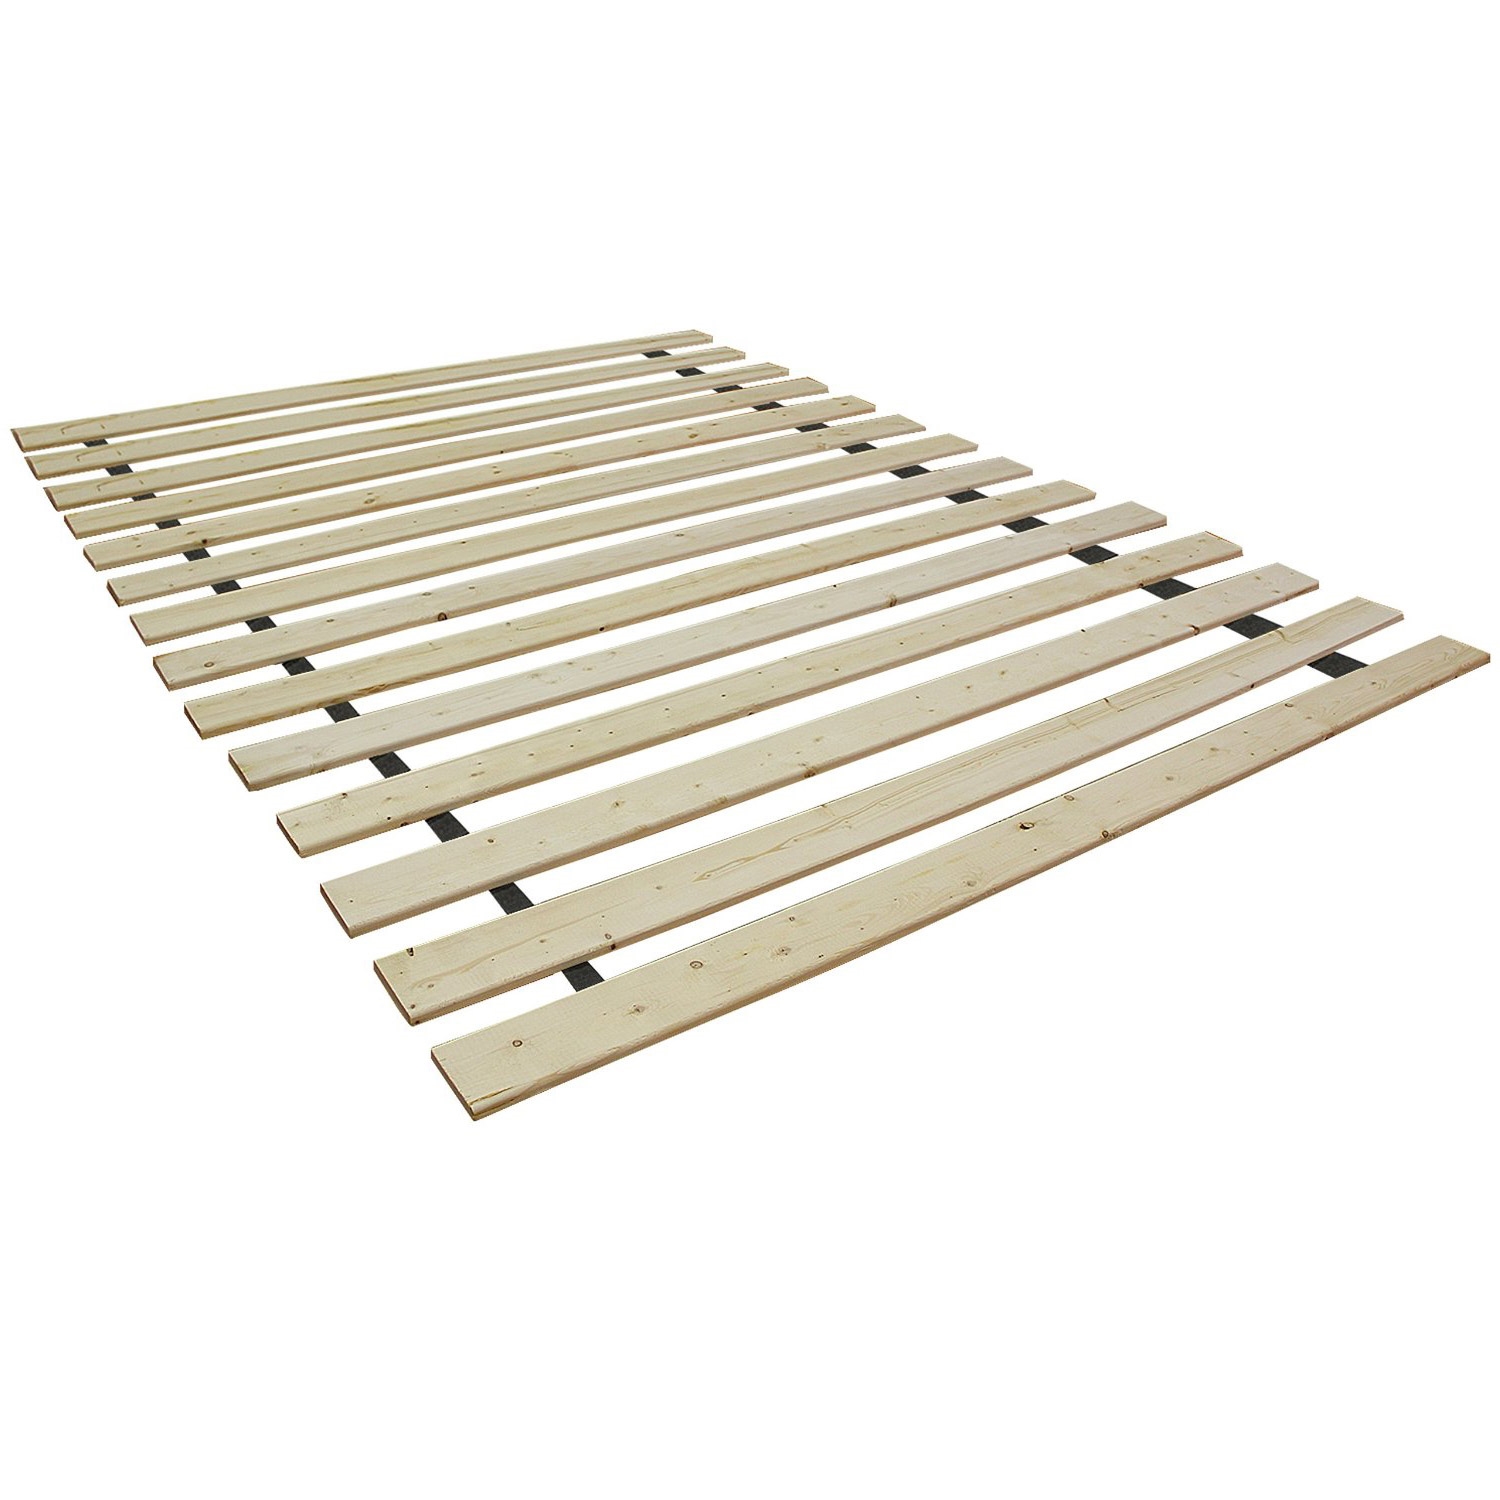 King size Solid Wood Bed Slats - Made in USA | FastFurnishings.com